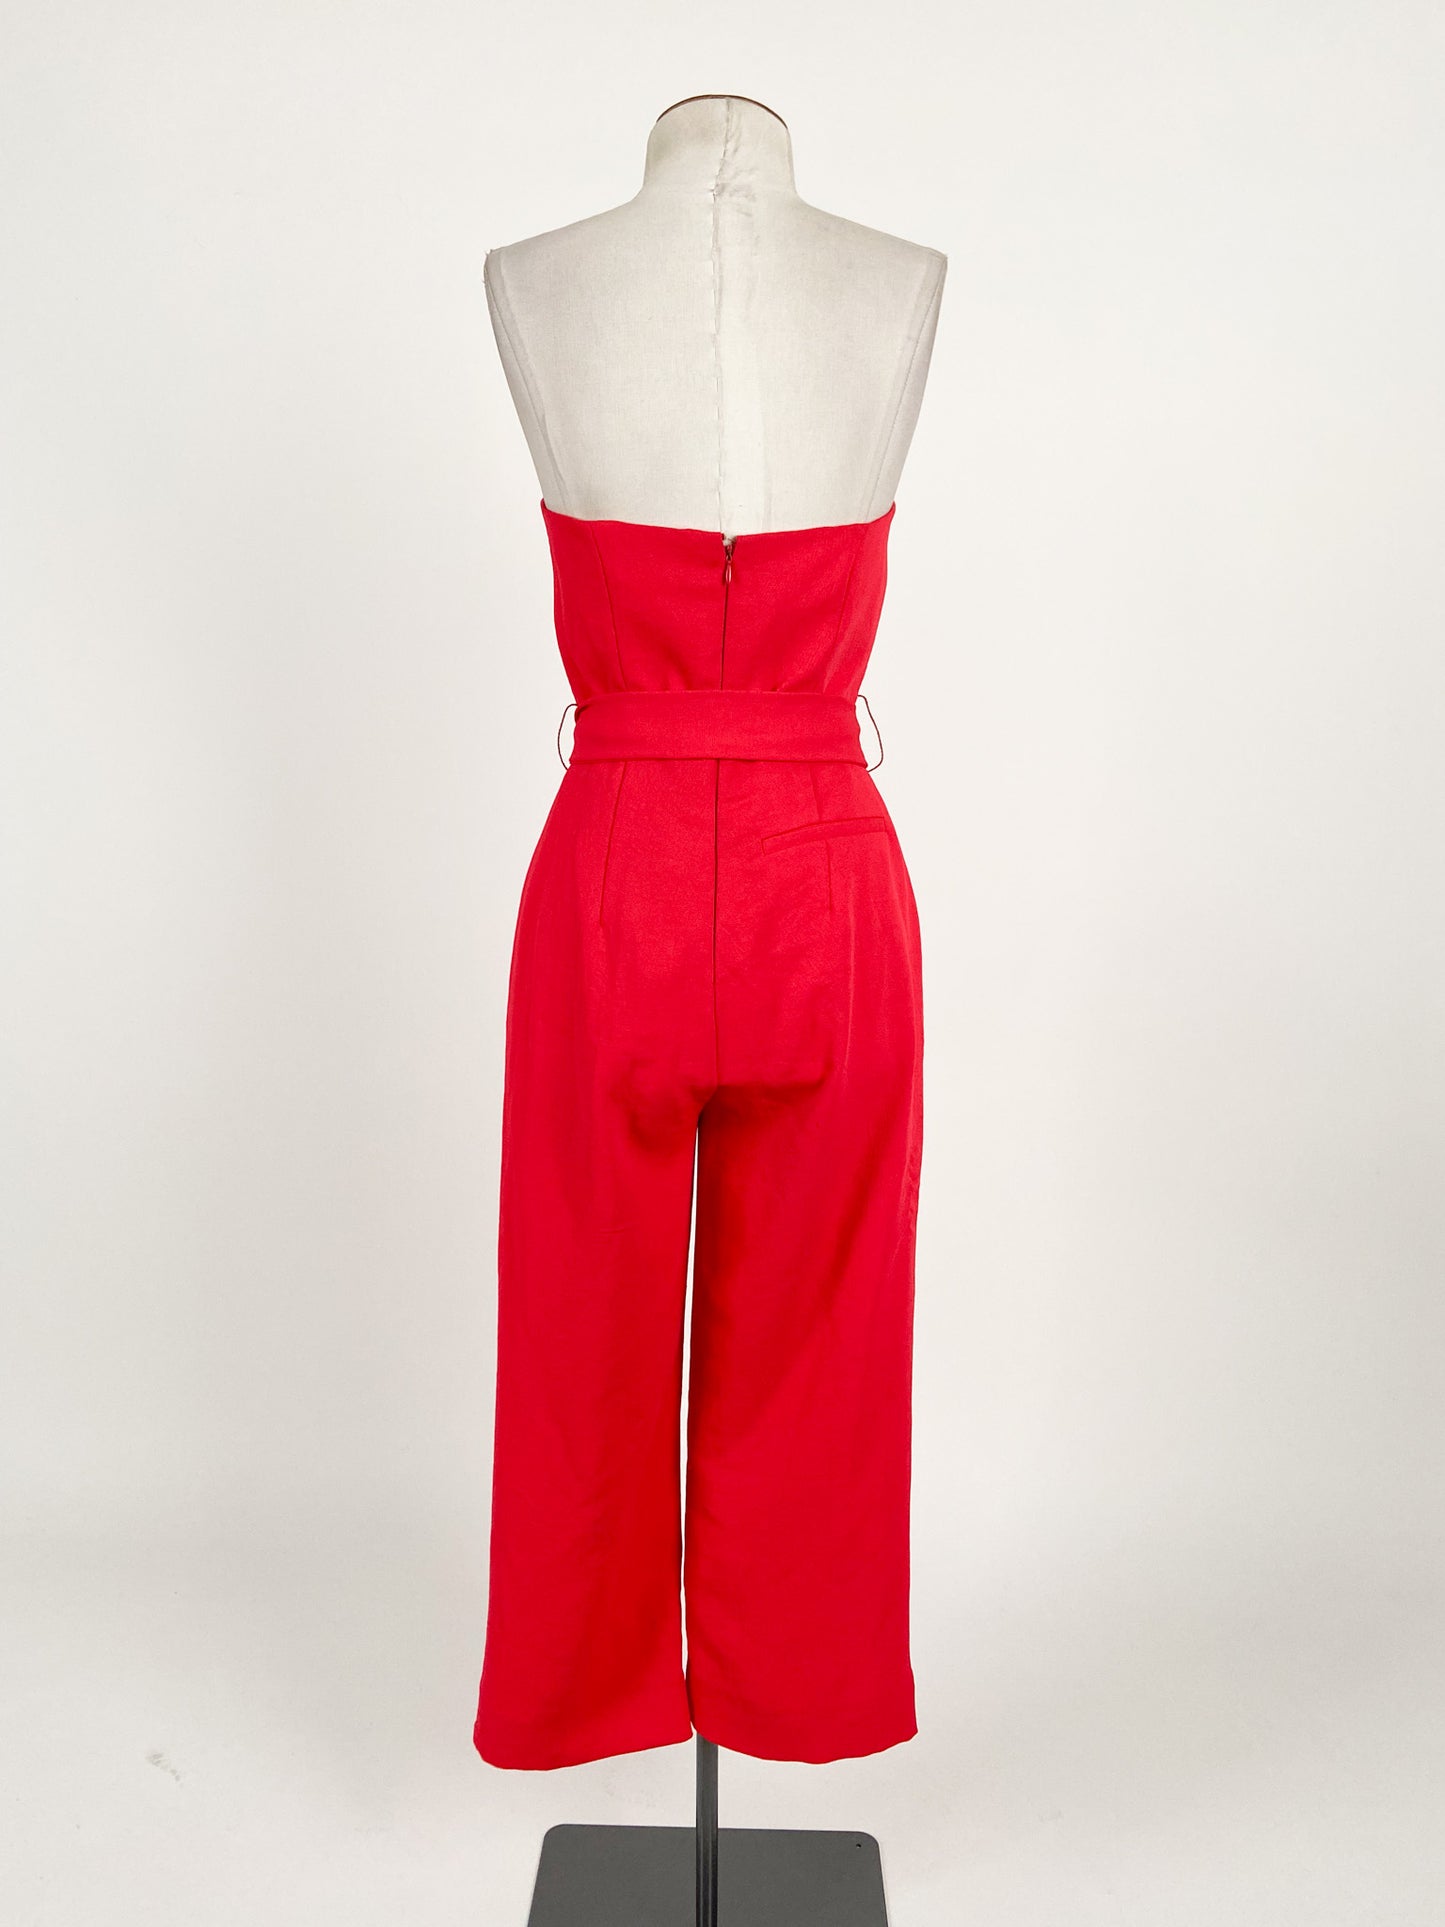 Kookai | Red Cocktail/Formal Jumpsuit | Size 8